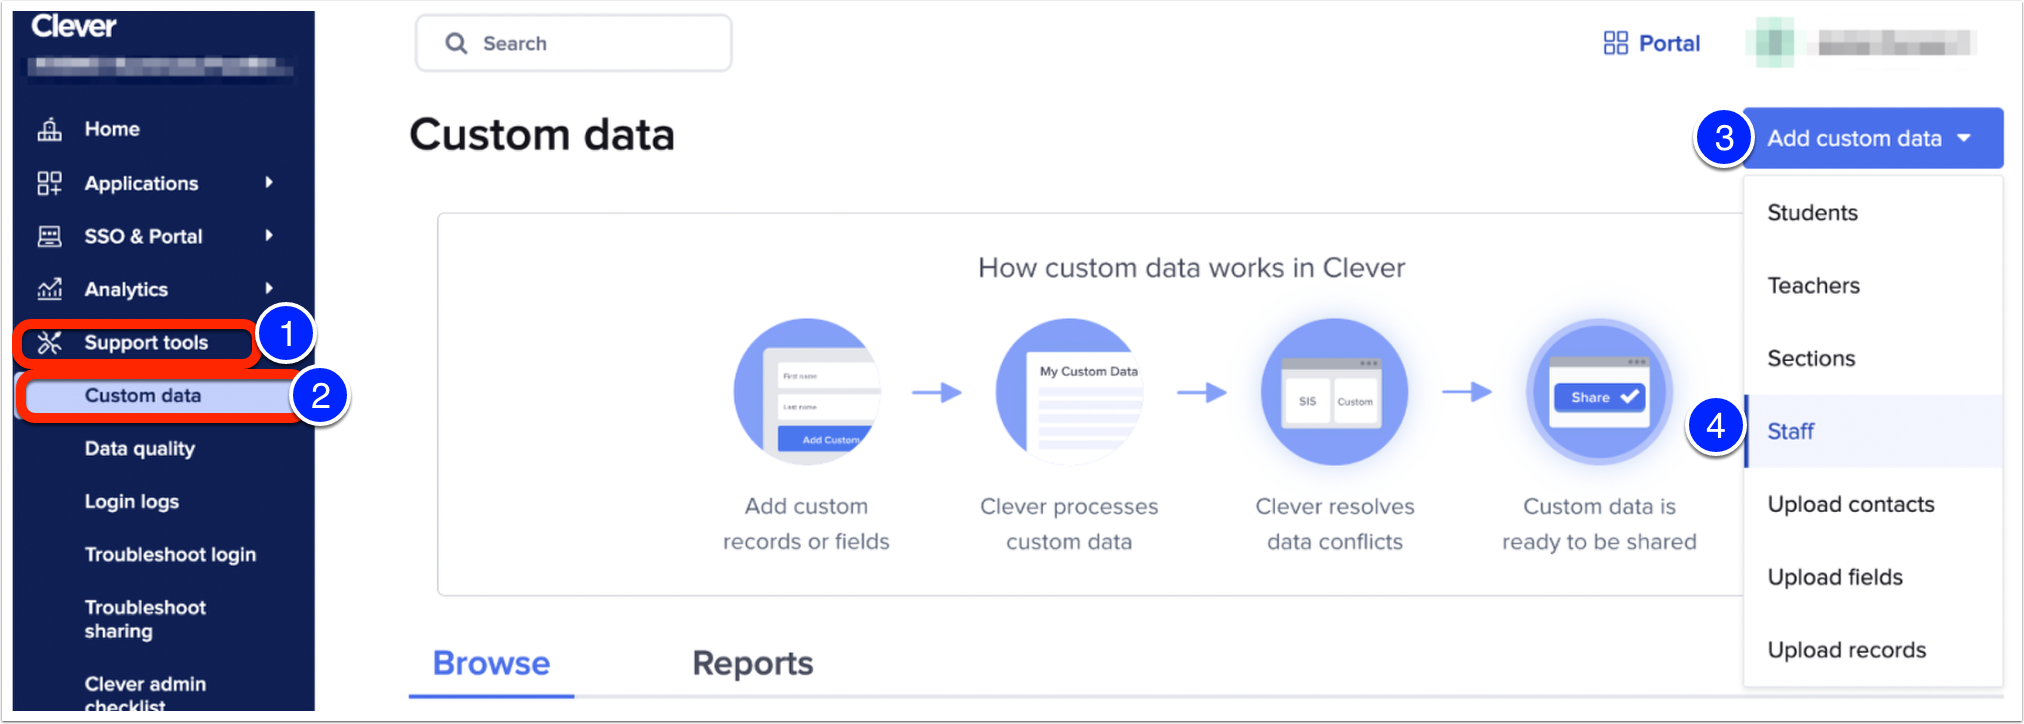 Image of Clever dashboard with Support Tools marked as step 1, custom data marked as step 2, add custom data marked as step 3, and staff marked as step 4